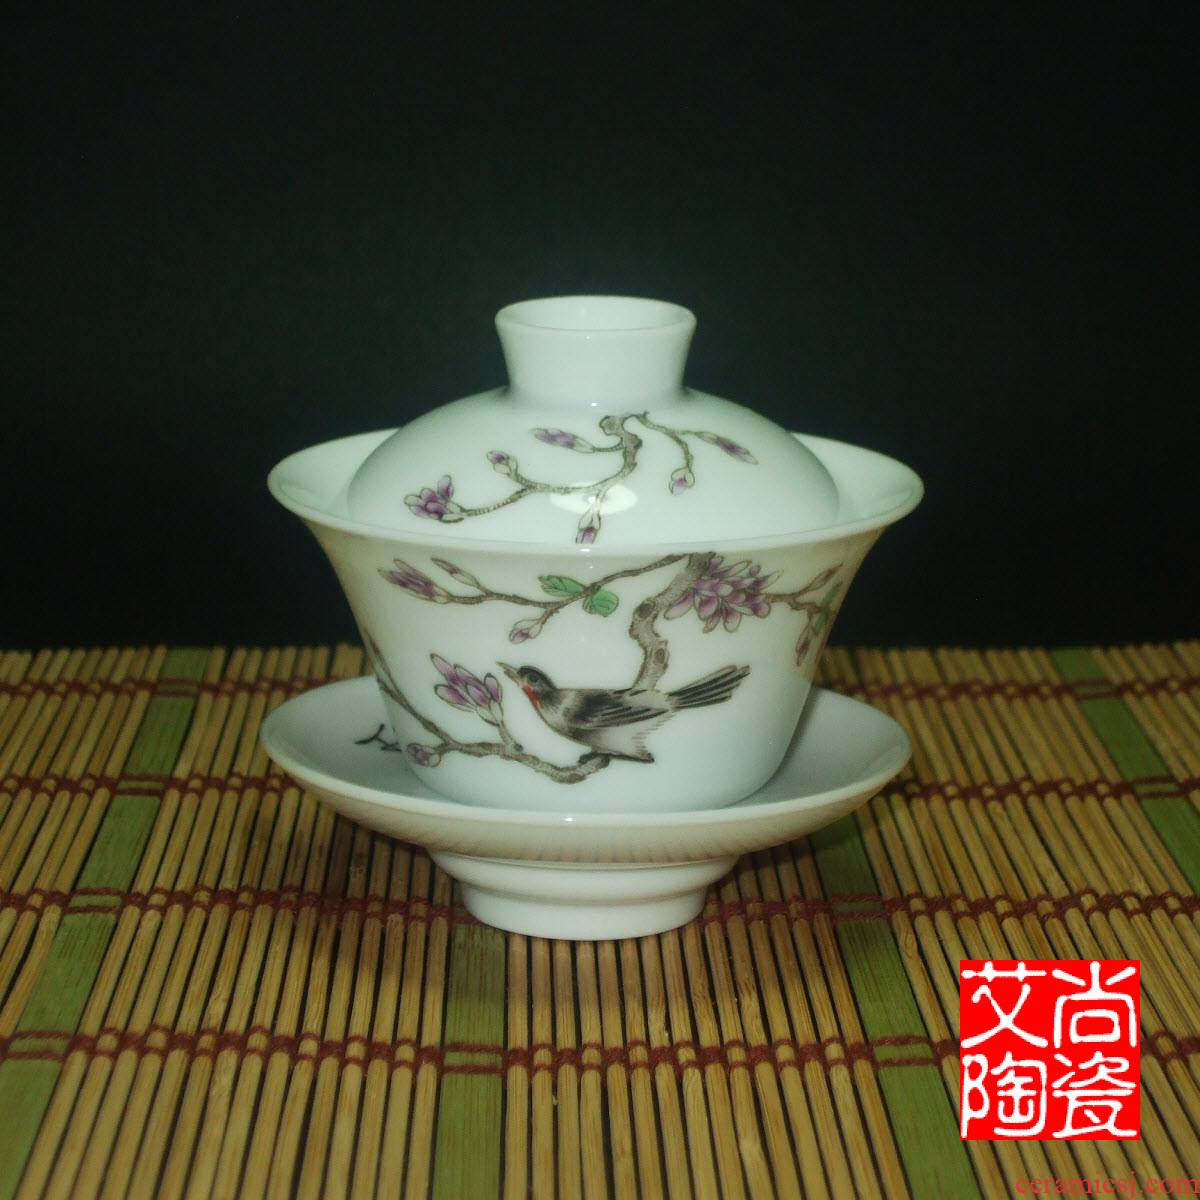 Submerged wood with pastel tureen painting of flowers and cover cup tea bowl archaize three teacups hand - made jingdezhen ceramics